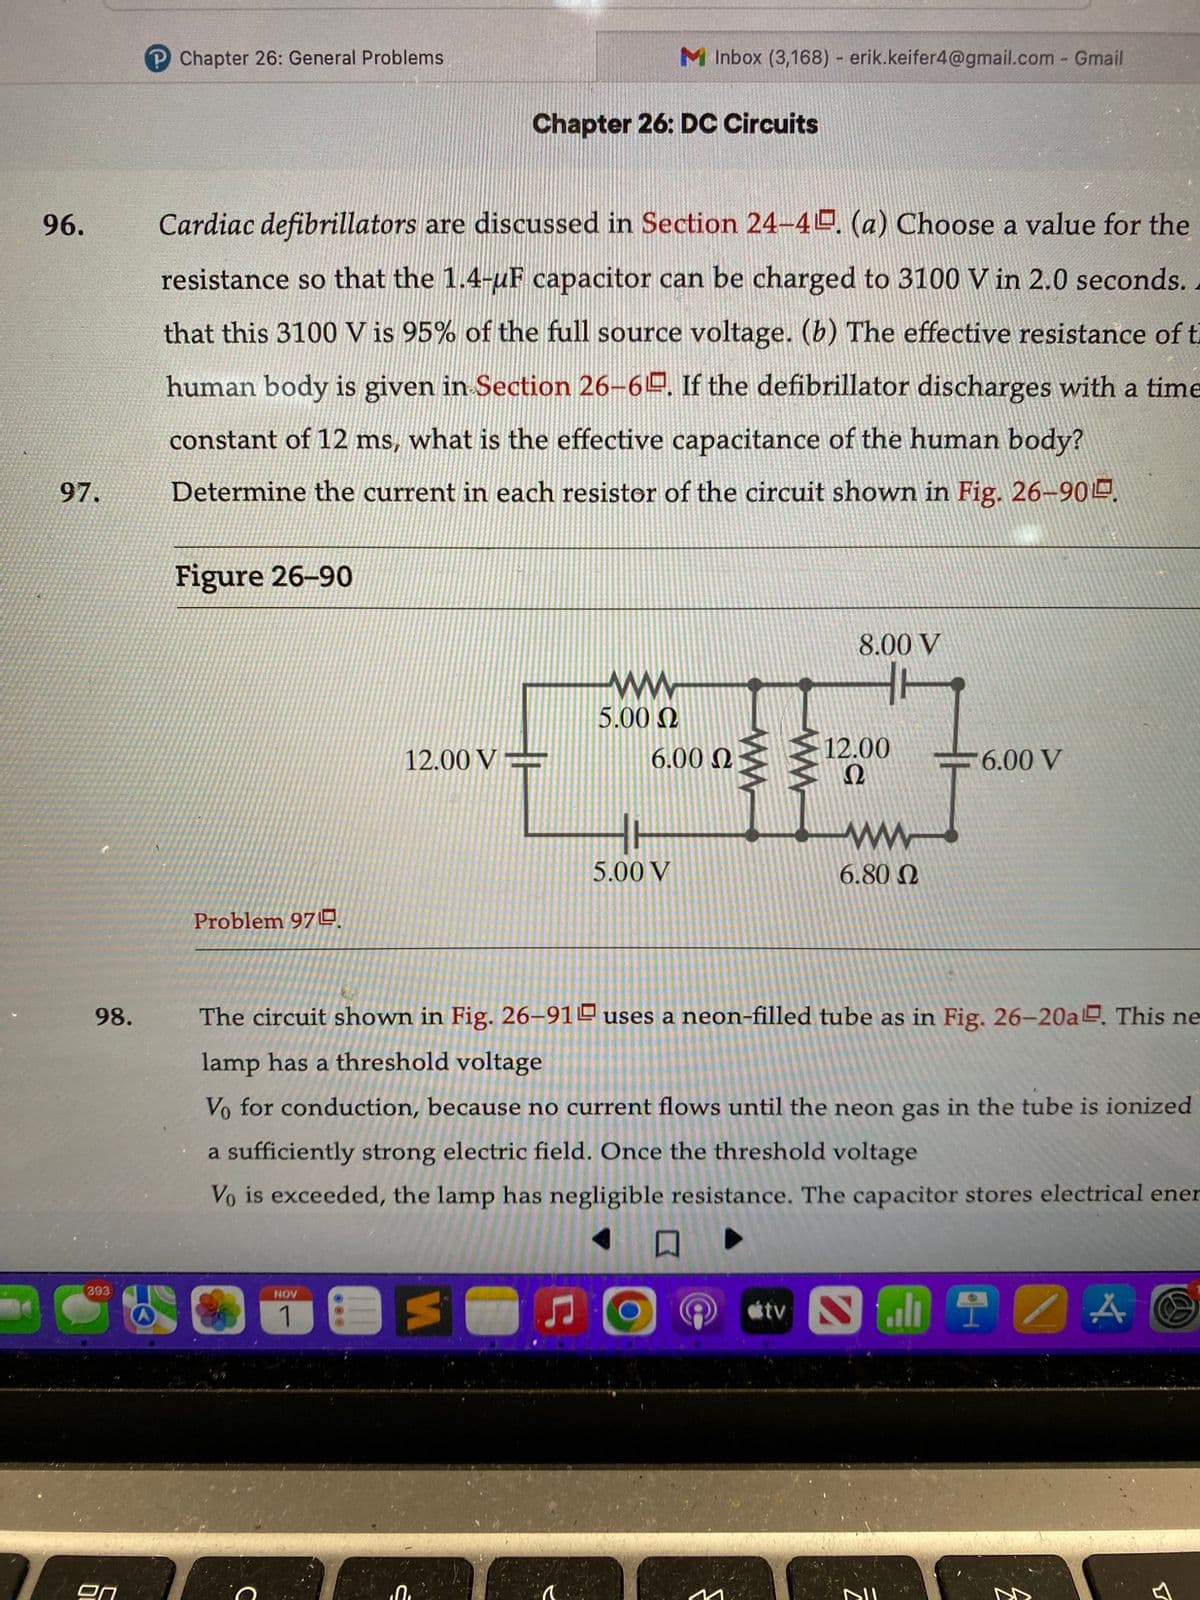 96.
97.
98.
393
P Chapter 26: General Problems
Figure 26-90
Cardiac defibrillators are discussed in Section 24-4. (a) Choose a value for the
resistance so that the 1.4-uF capacitor can be charged to 3100 V in 2.0 seconds.
that this 3100 V is 95% of the full source voltage. (b) The effective resistance of t
human body is given in Section 26-6. If the defibrillator discharges with a time
constant of 12 ms, what is the effective capacitance of the human body?
Determine the current in each resistor of the circuit shown in Fig. 26-90.
Problem 97.
12.00 V
C
NOV
1 E
Ć
Chapter 26: DC Circuits
0₁
5
5.00 Ω
a
M Inbox (3,168) - erik.keifer4@gmail.com - Gmail
6.00 Ω
5.00 V
The circuit shown in Fig. 26-91 uses a neon-filled tube as in Fig. 26-20a. This ne
lamp has a threshold voltage
Vo for conduction, because no current flows until the neon gas in the tube is ionized
a sufficiently strong electric field. Once the threshold voltage
Vo is exceeded, the lamp has negligible resistance. The capacitor stores electrical ener
口
M
8.00 V
tv
12.00
Ω
ww
6.80 Ω
6.00 V
SHIZA
A